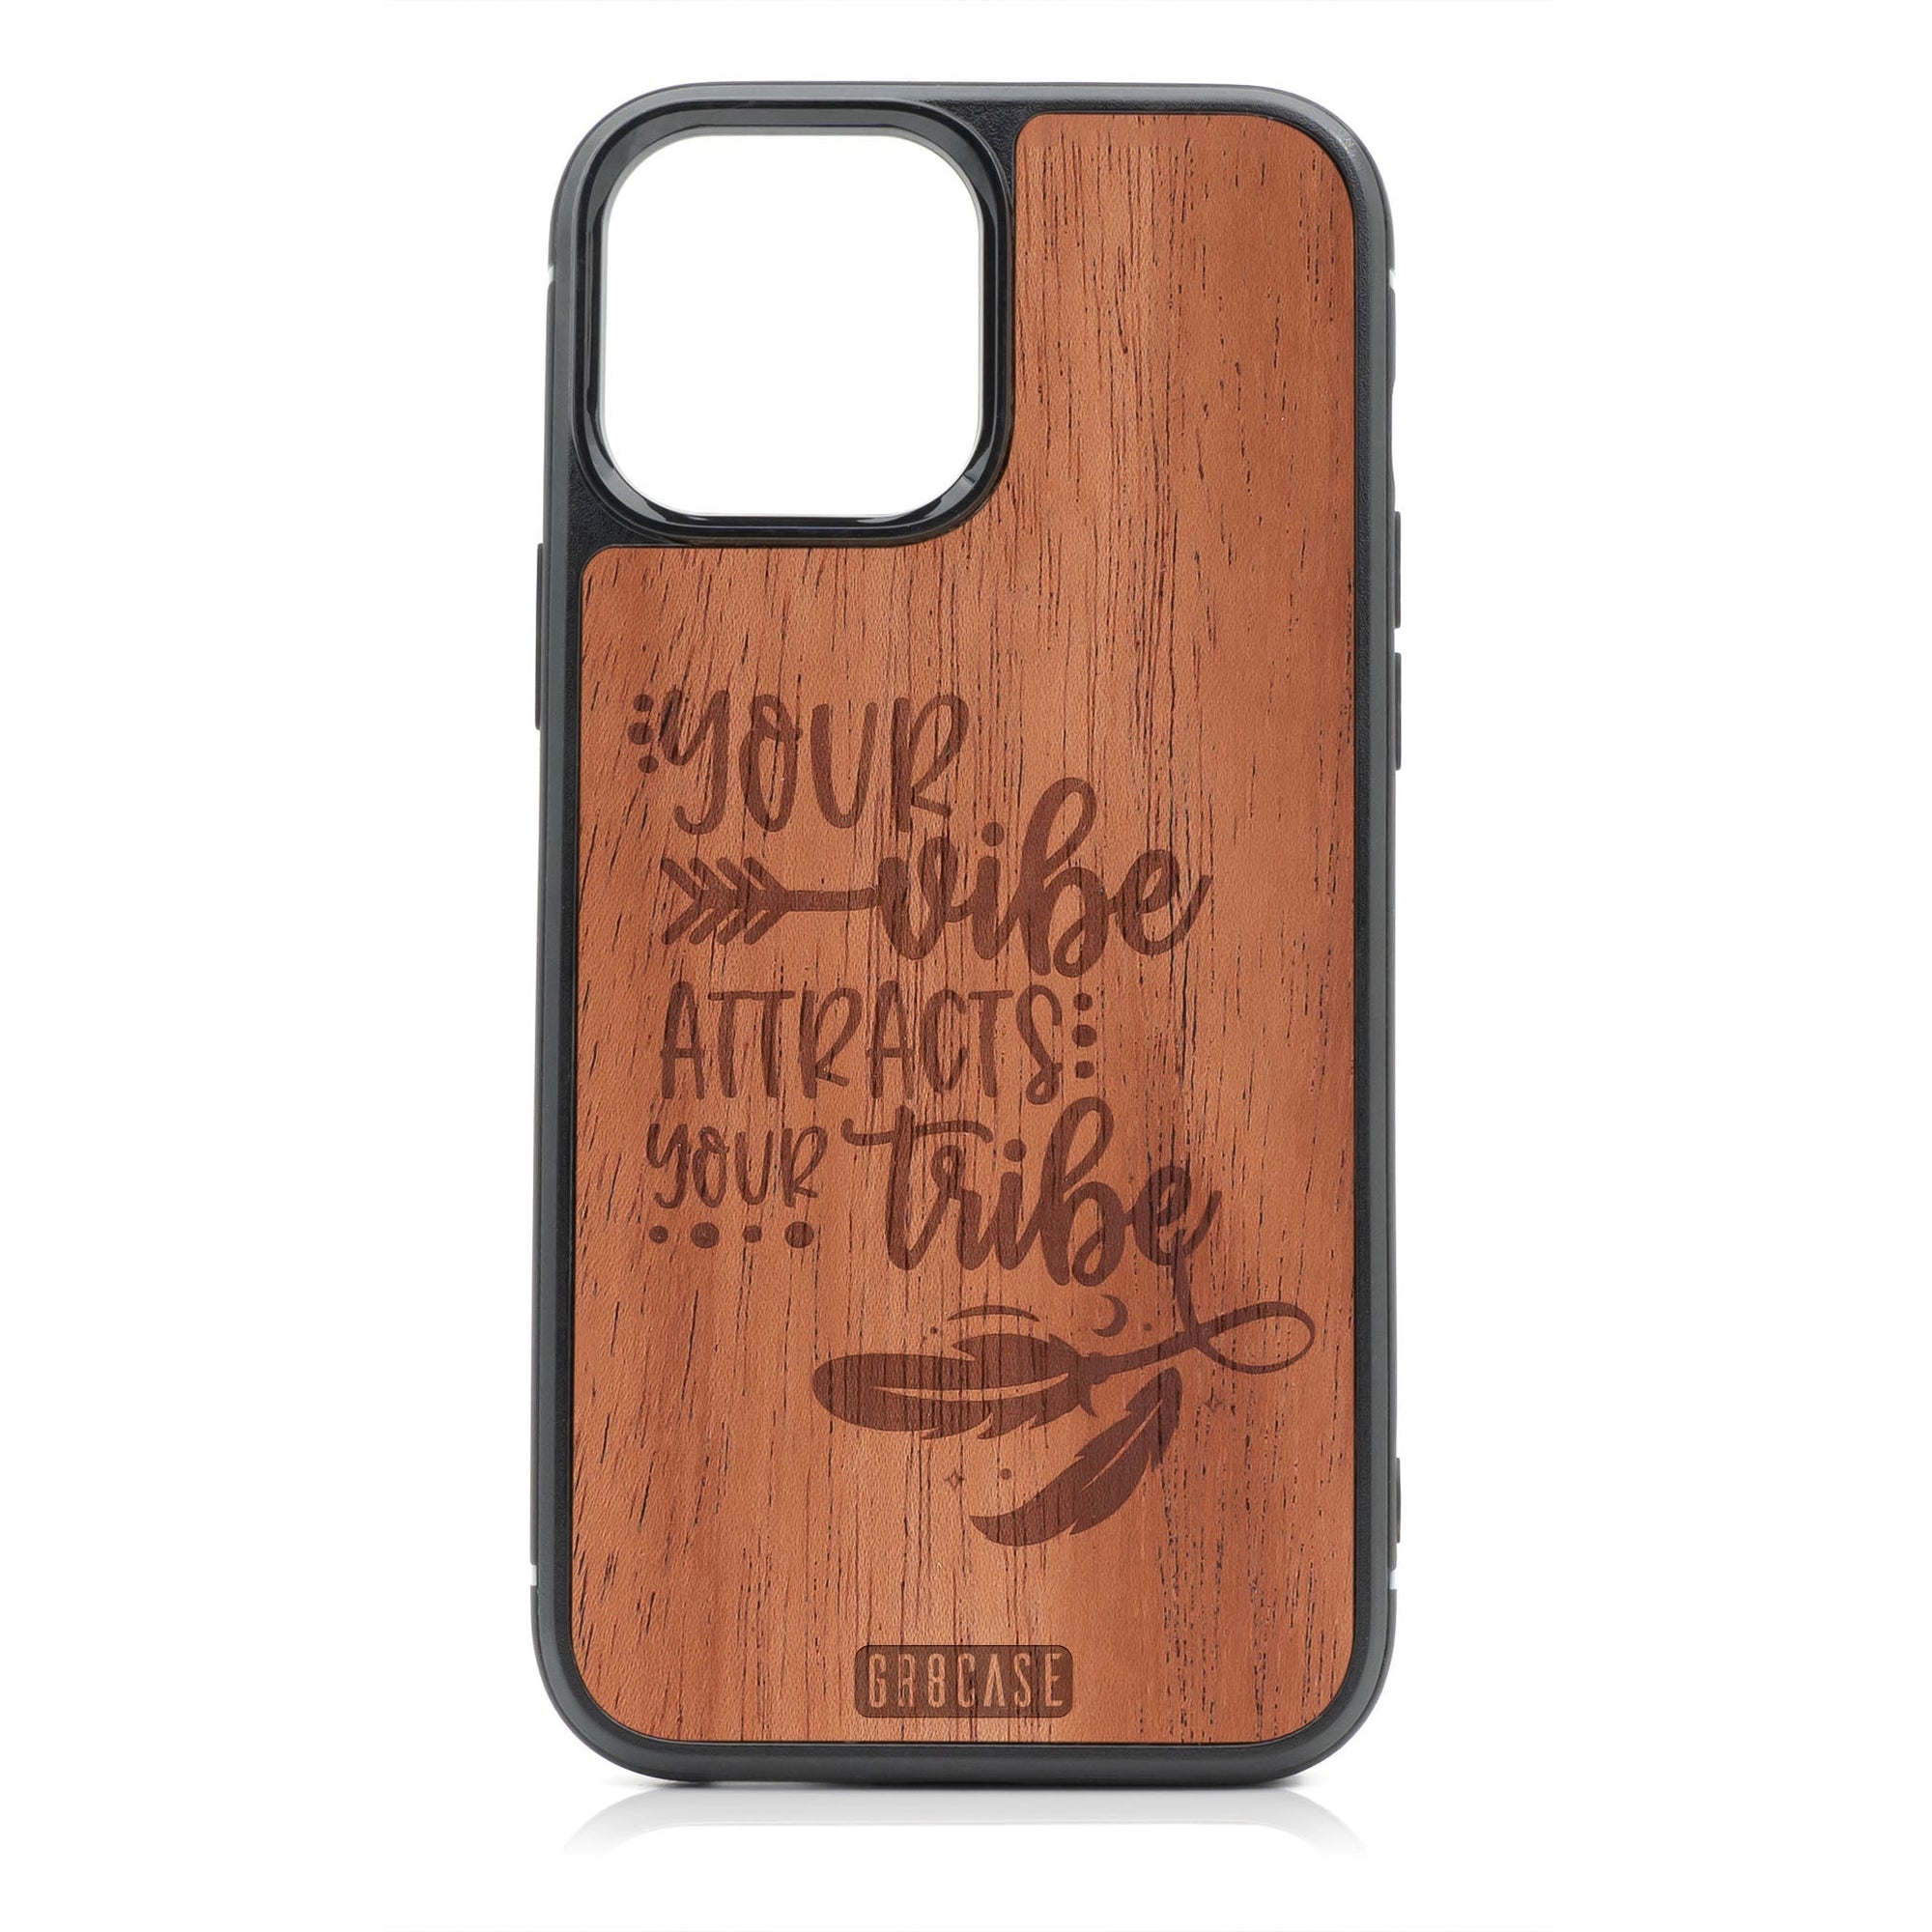 Your Vibe Attracts Your Tribe Design Wood Case For iPhone 15 Pro Max